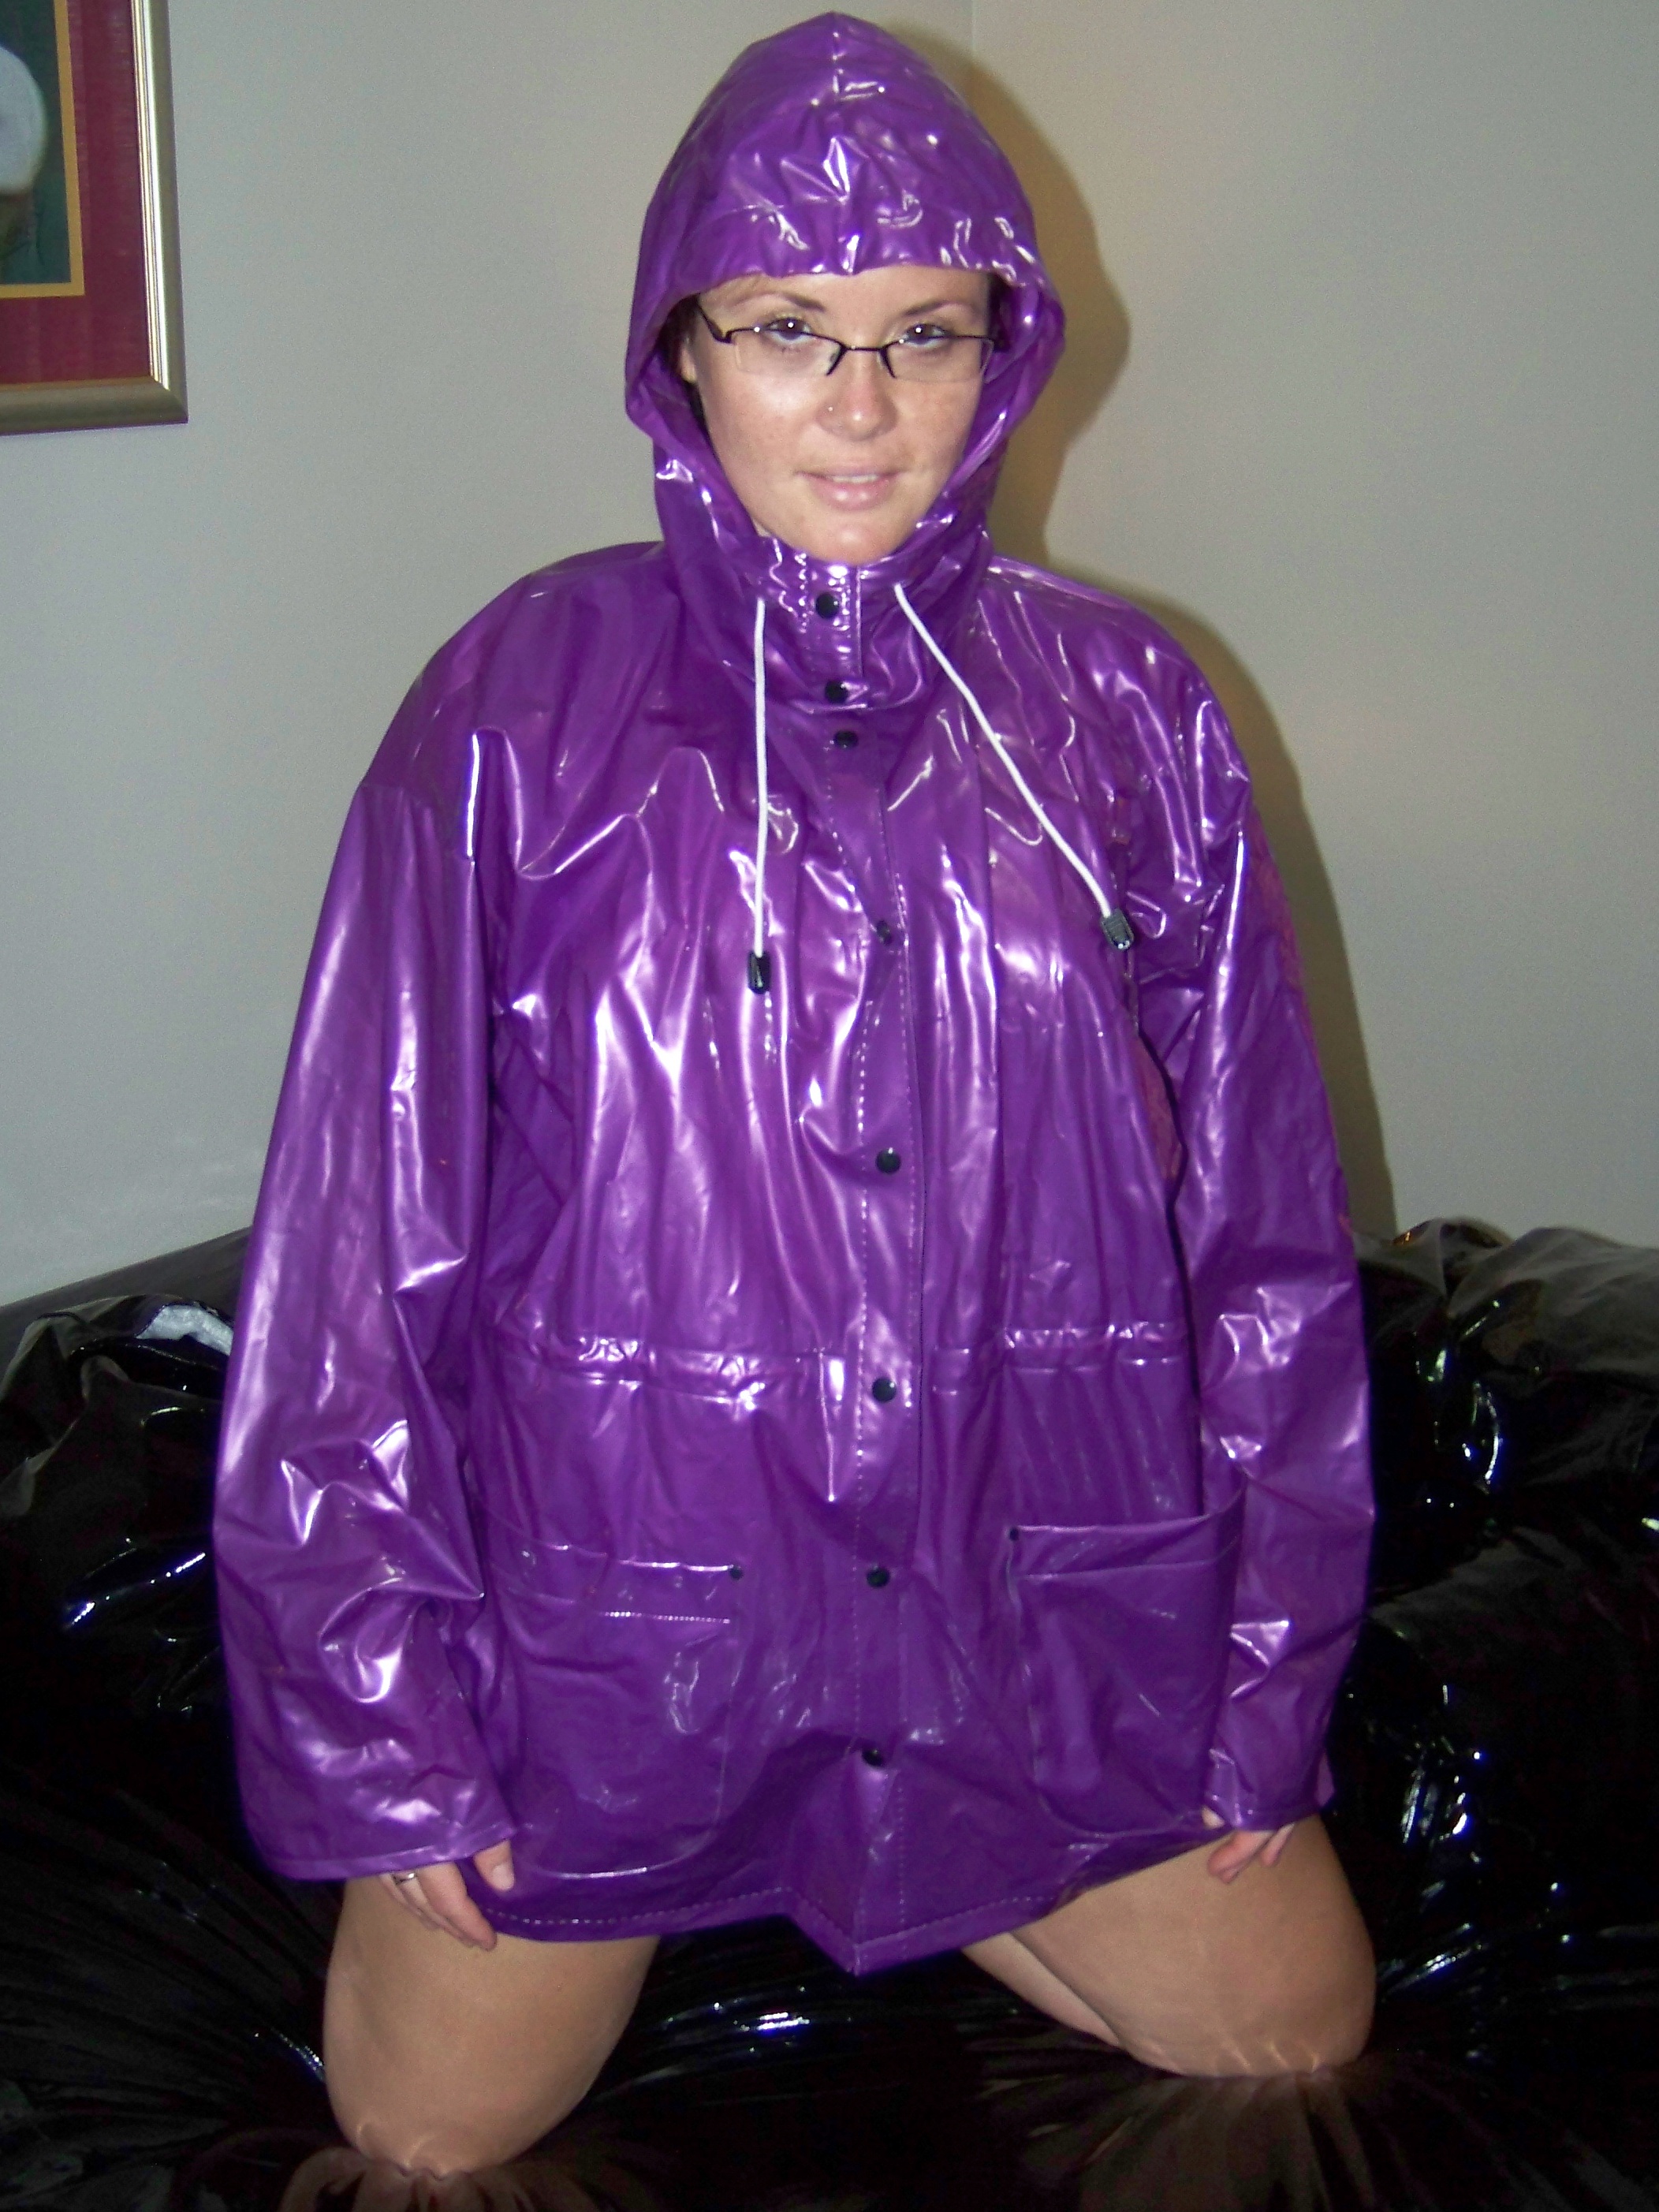 Rainweargirl A Place To Appreciate The Style Beauty And Practicality Of Rainwear In All Forms